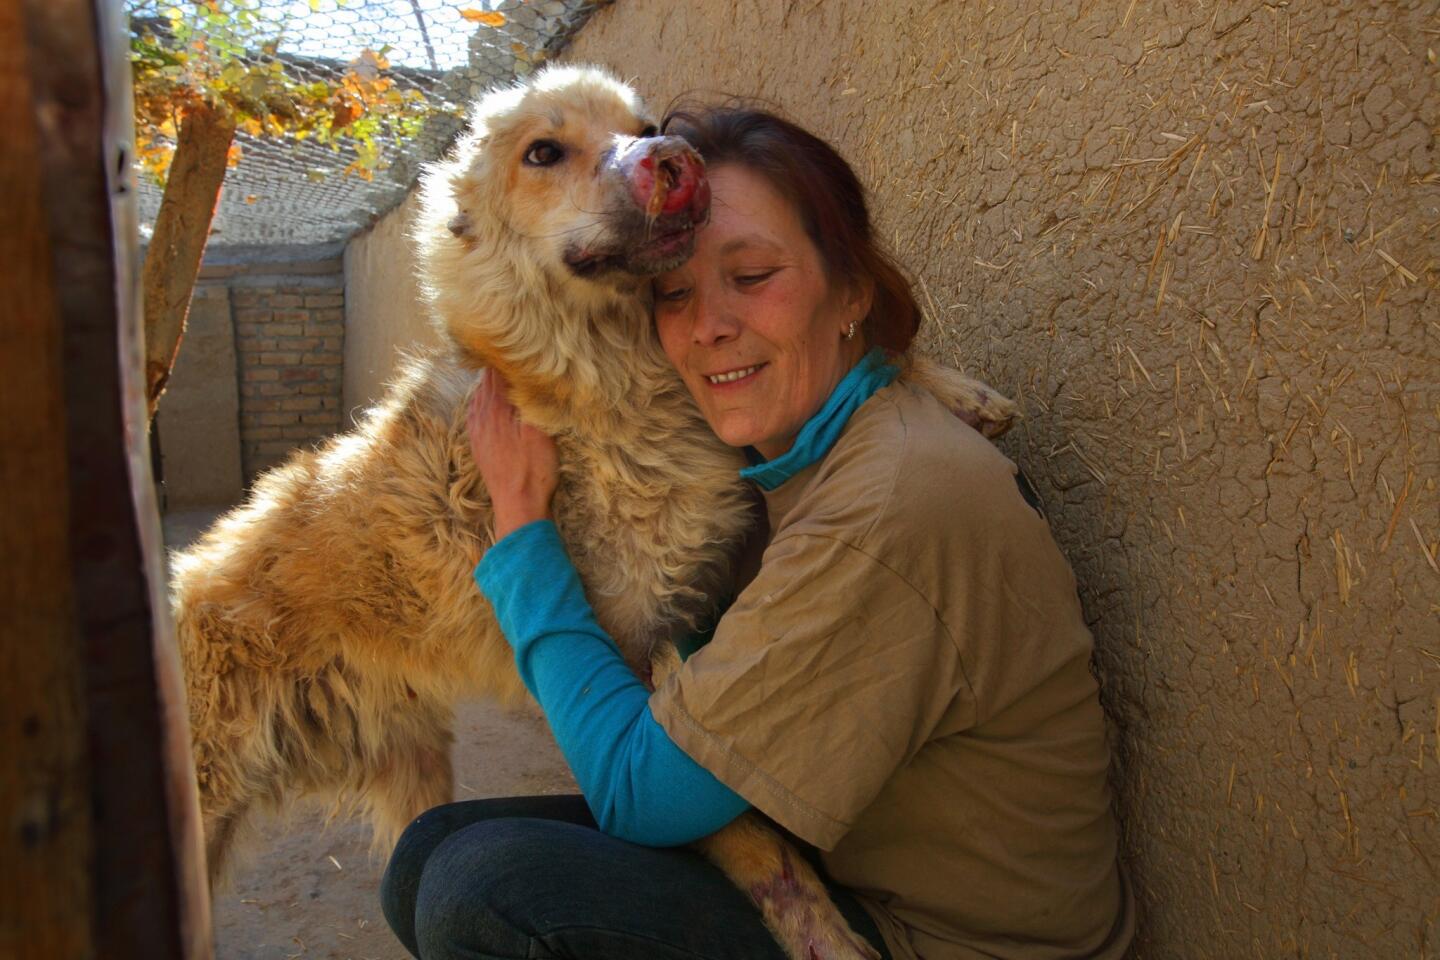 Louise Hastie, a former British soldier, runs Nowzad, a charity that reunites Afghan pets with Western soldiers and contractors who can't bear to leave them behind. All of the dogs adopted are strays, like Joey, who suffers from sores on his nose and paws, but is getting much better, according to Hastie, who has become very close to the dog.